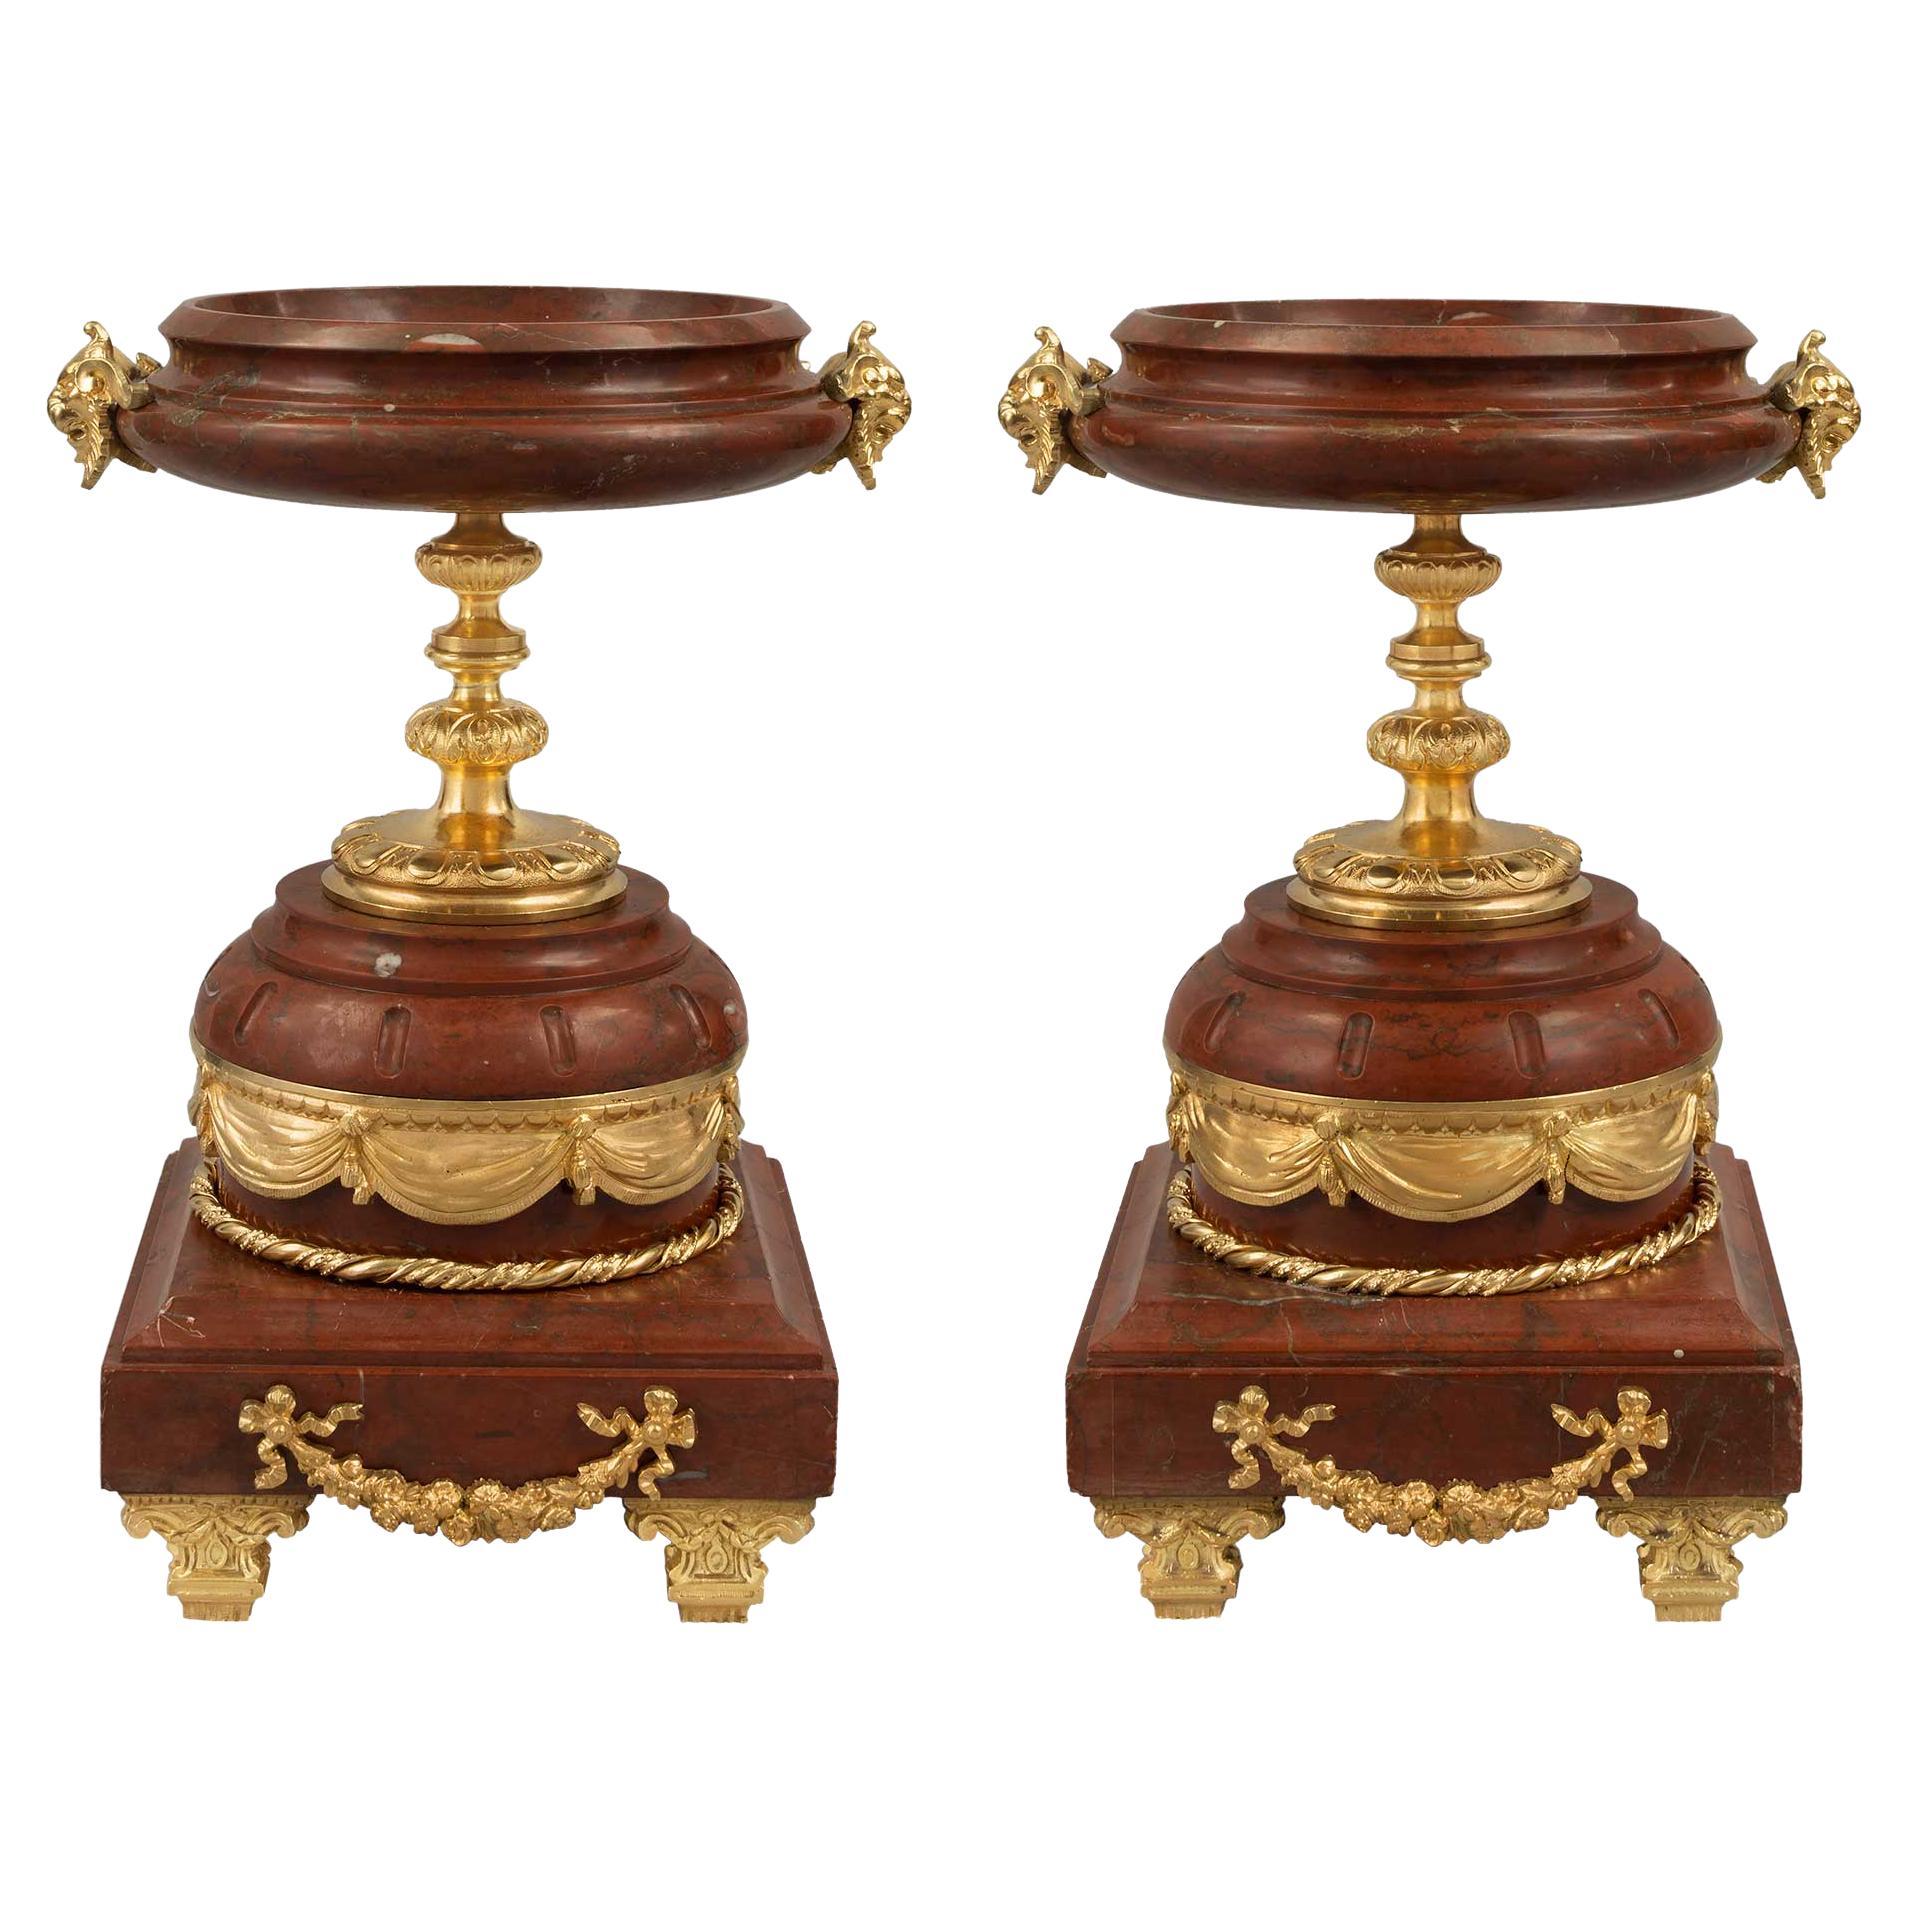 Pair of French Louis XVI Style Mid-19th Century Marble and Ormolu Tazzas